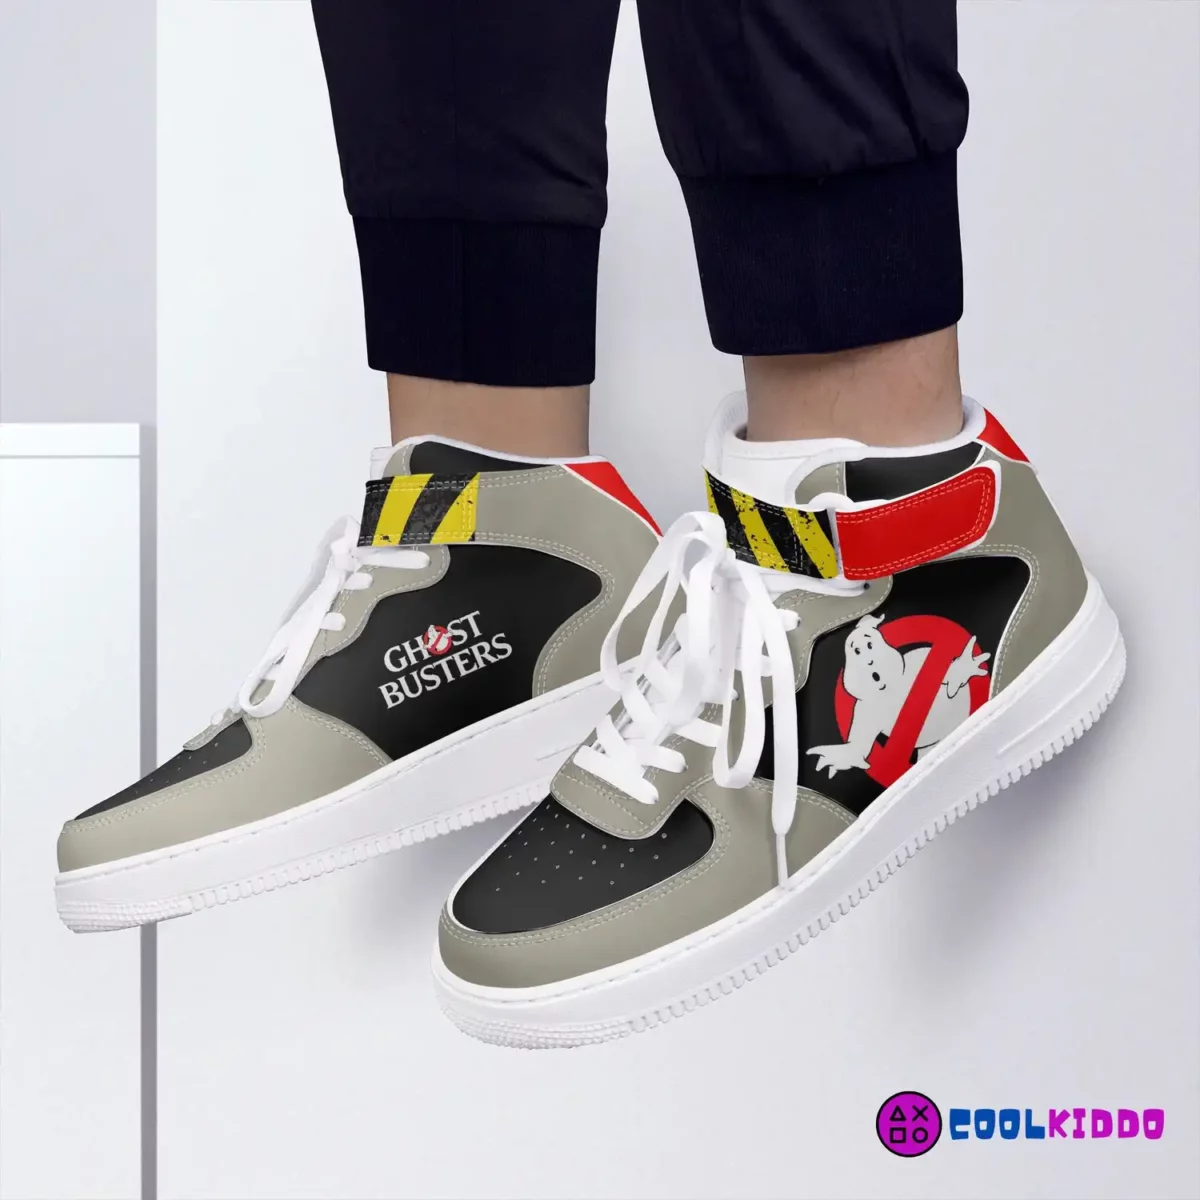 Custom GHOSTBUSTERS Air Force One Style High-Top Leather Sneakers – Casual Shoes for Youth/Adults Cool Kiddo 20